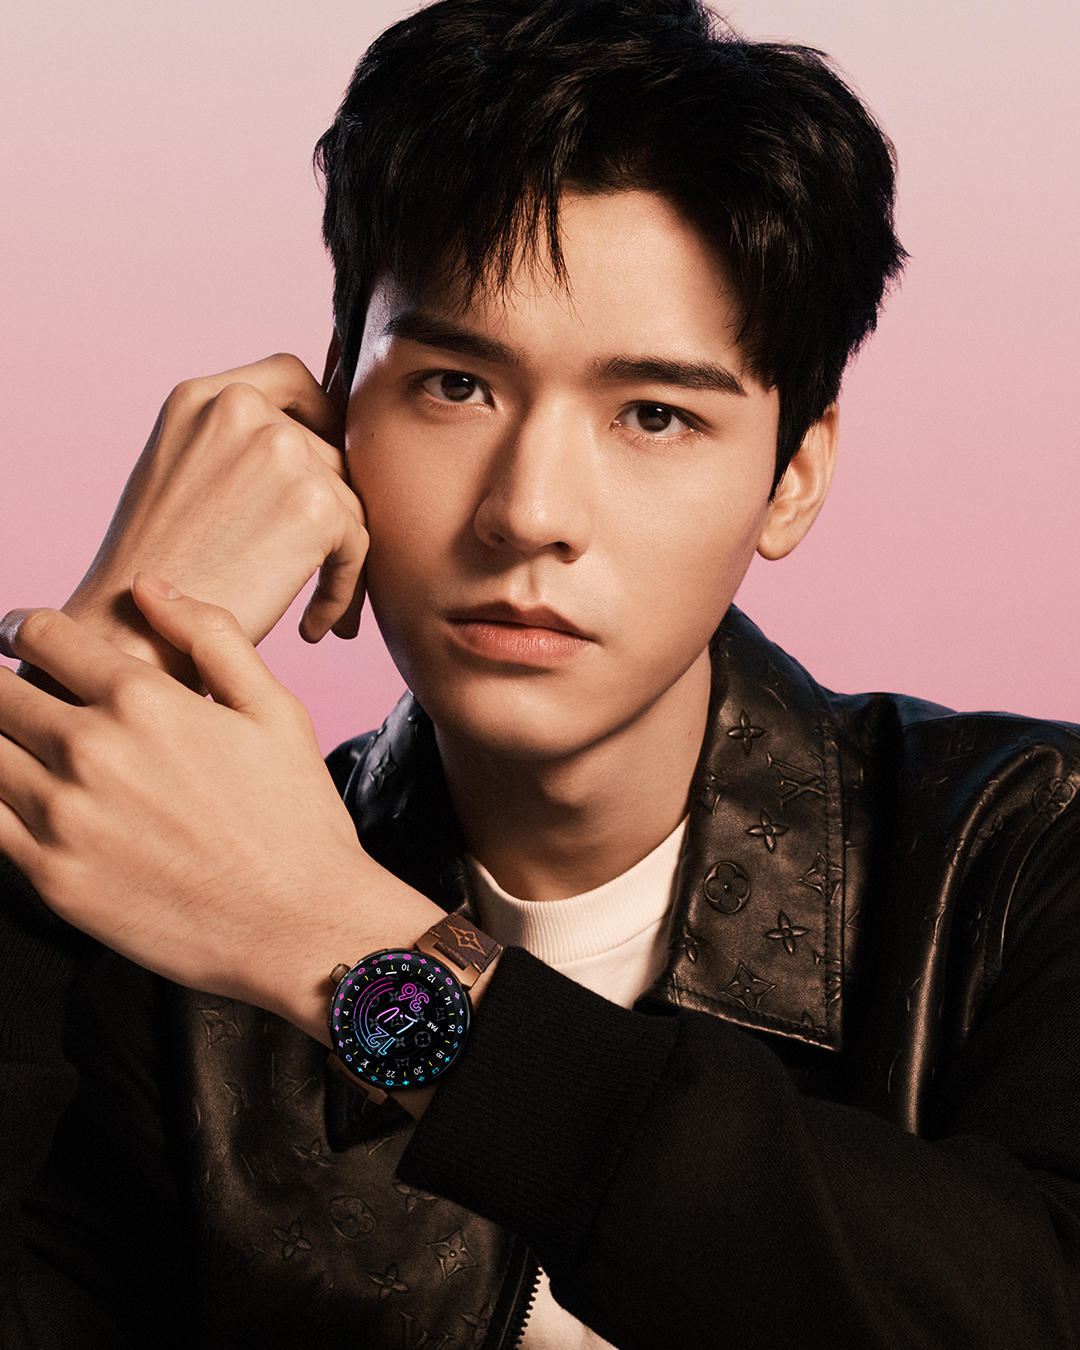 Louis Vuitton on X: A distant horizon. #GongJun showcases the #LouisVuitton  Tambour Horizon Light Up Connected Watch, featuring a beautifully designed  curved sapphire glass that gives the appearance of an endless screen.